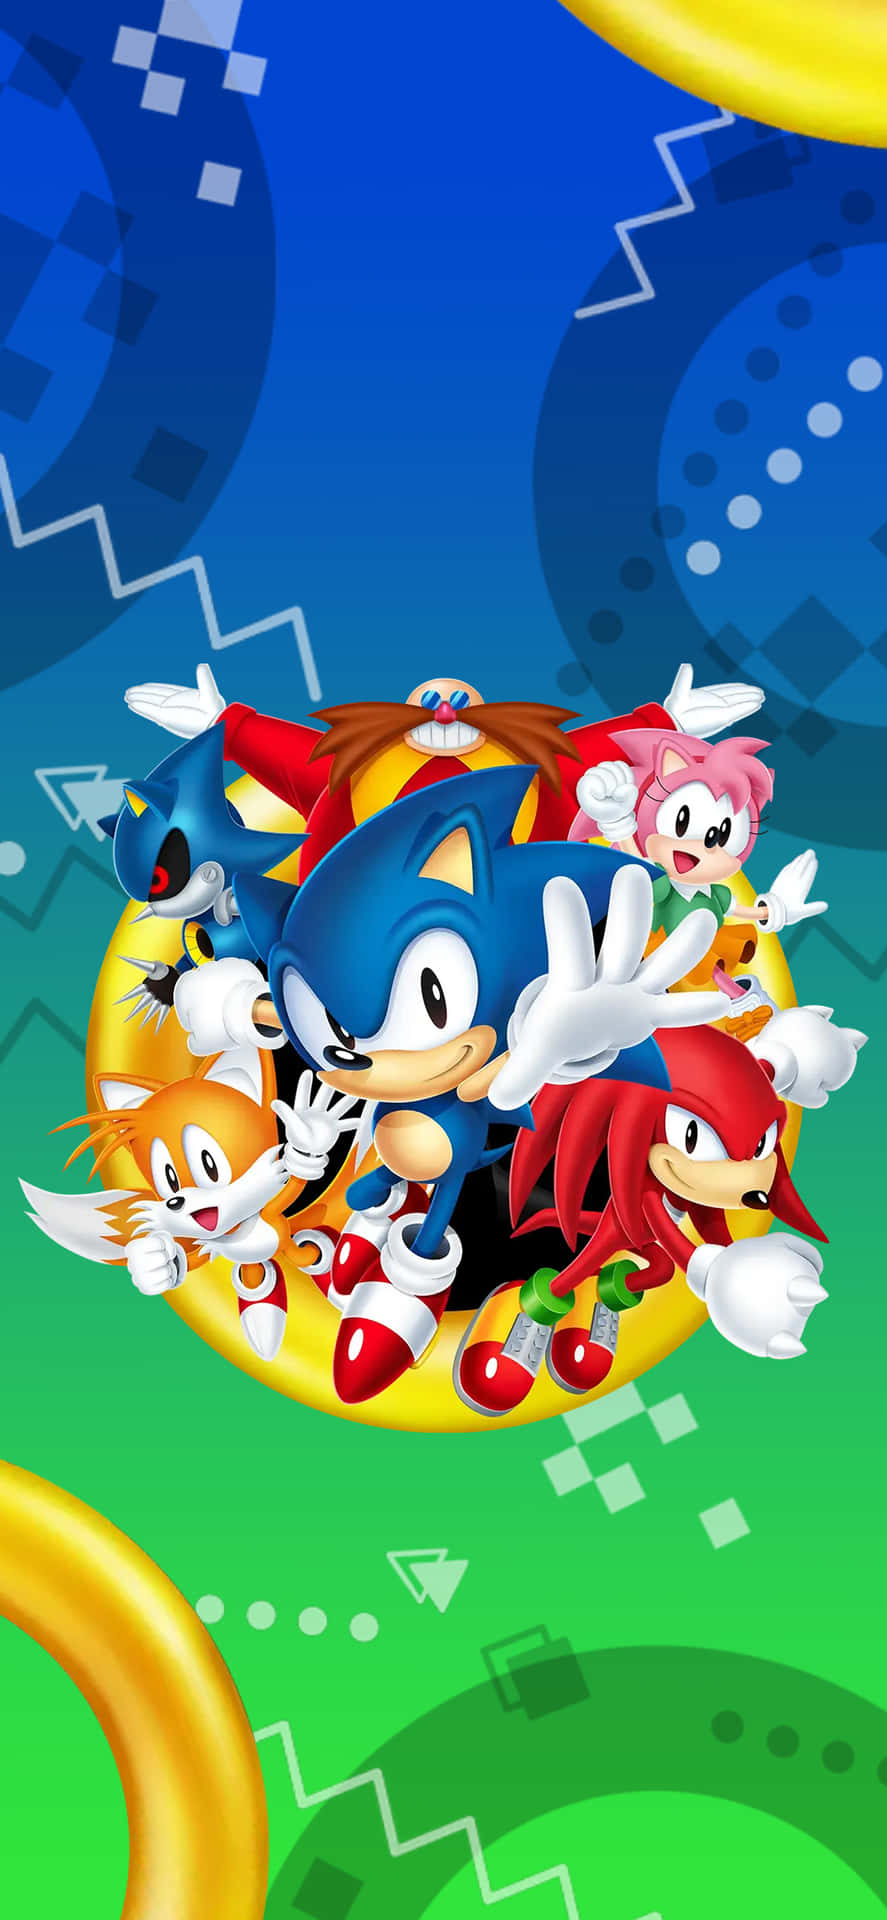 Classic Sonic the Hedgehog in action Wallpaper